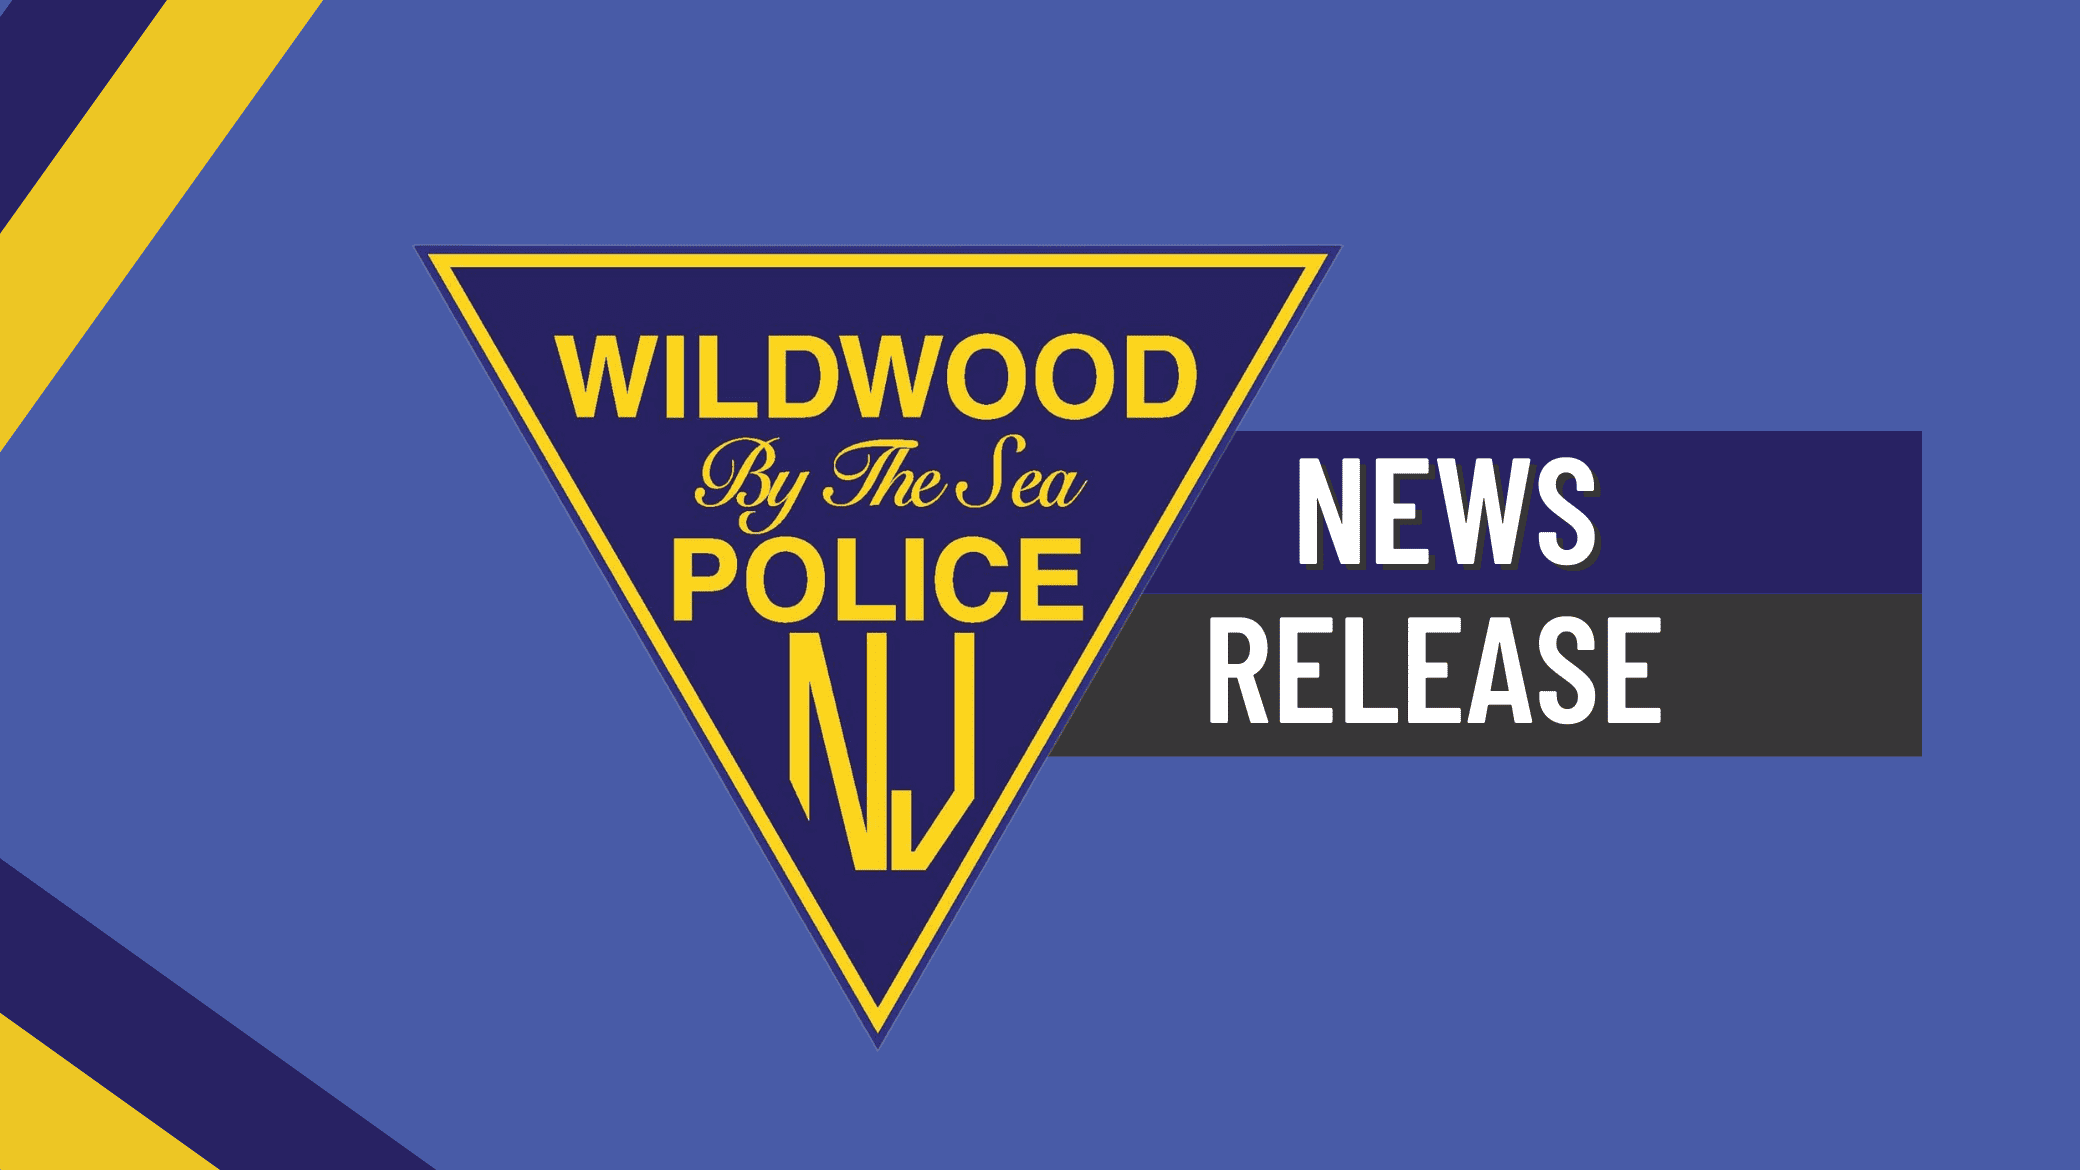 Wildwood Police Arrest 16-Year-Old Suspect in Child Endangerment and Criminal Sexual Contact Case